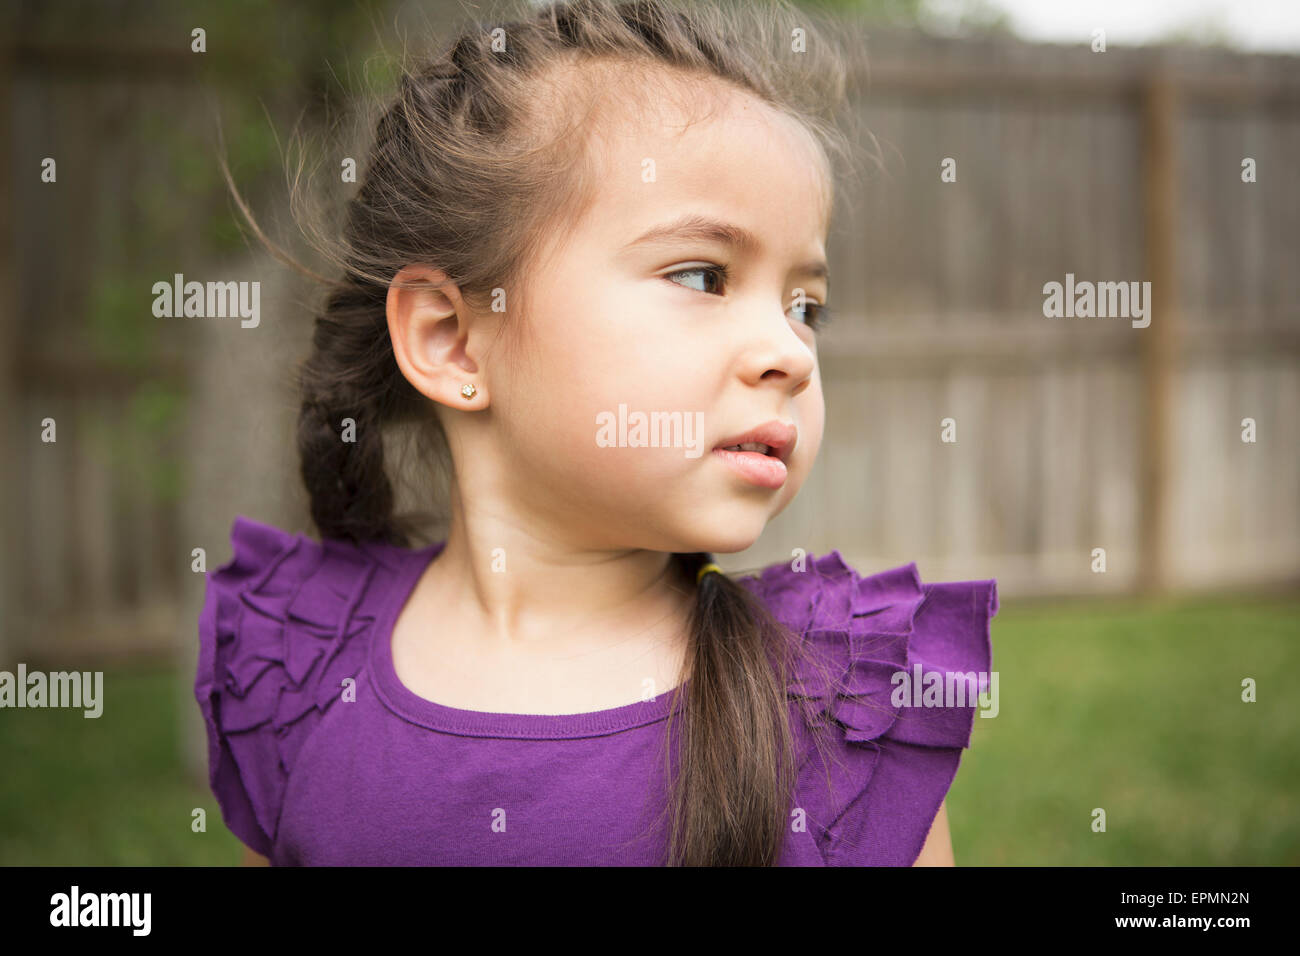 A young girl looking over her shoulder. Stock Photo